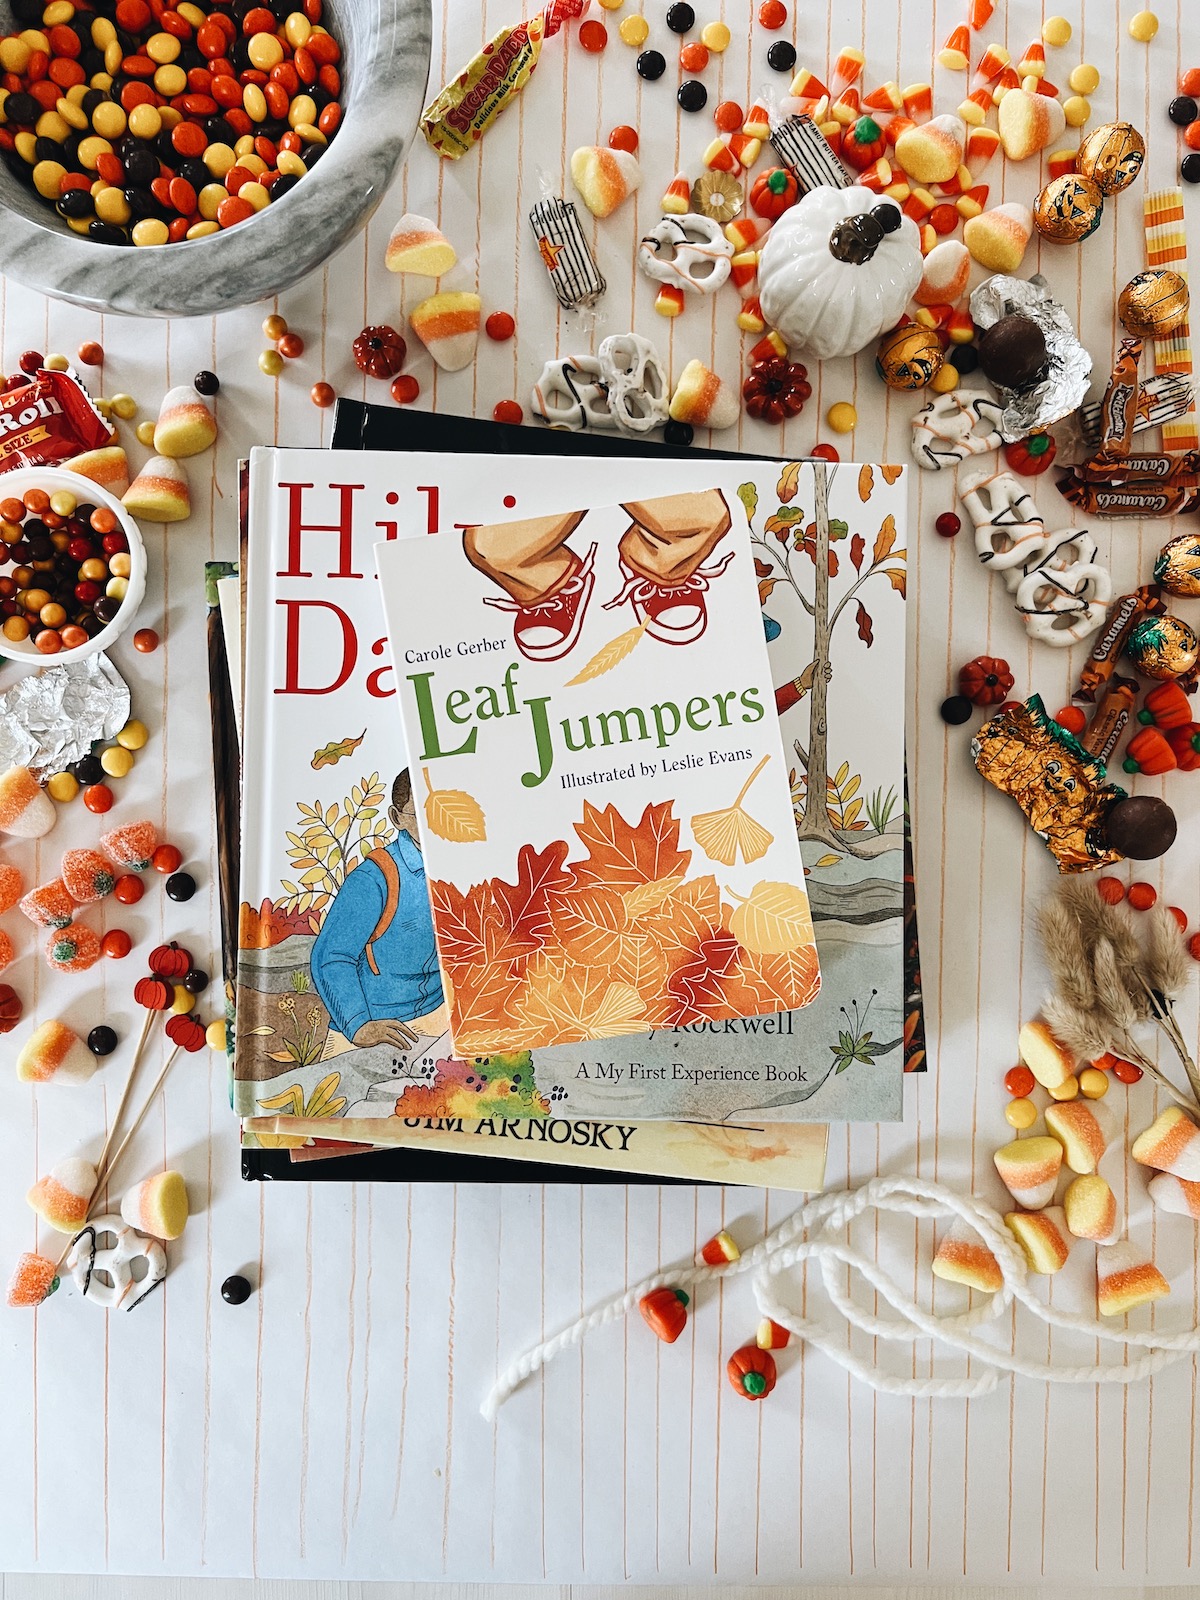 THE MOST BEAUTIFUL AUTUMN CHILDREN’S BOOKS (NO DEMONS OR WITCHCRAFT)